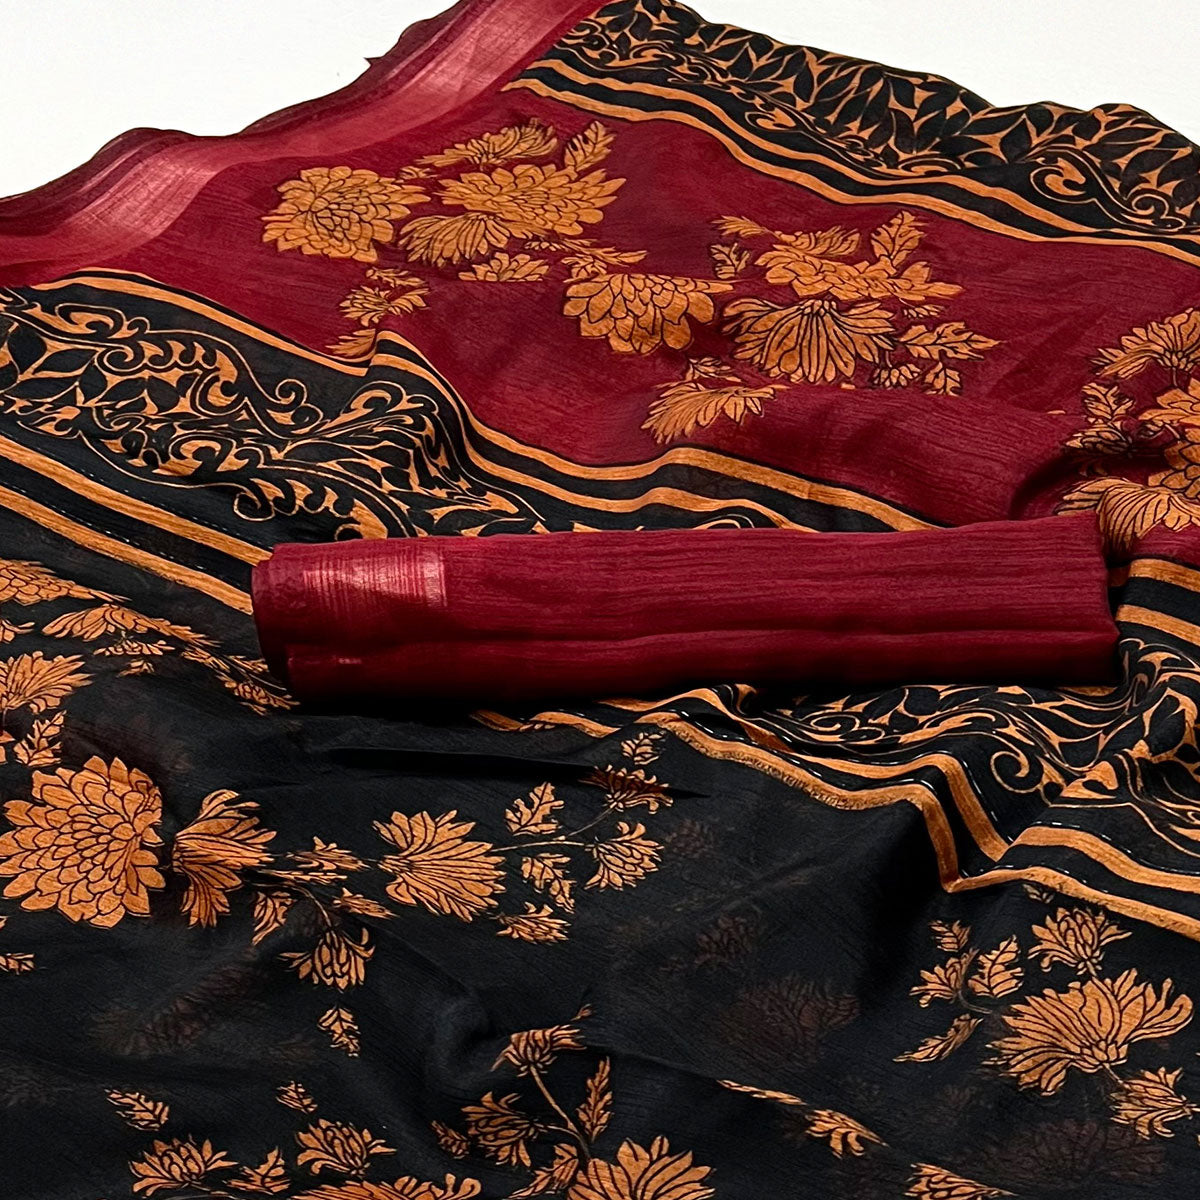 Black & Red Floral Printed Dola Silk Saree With Woven Border